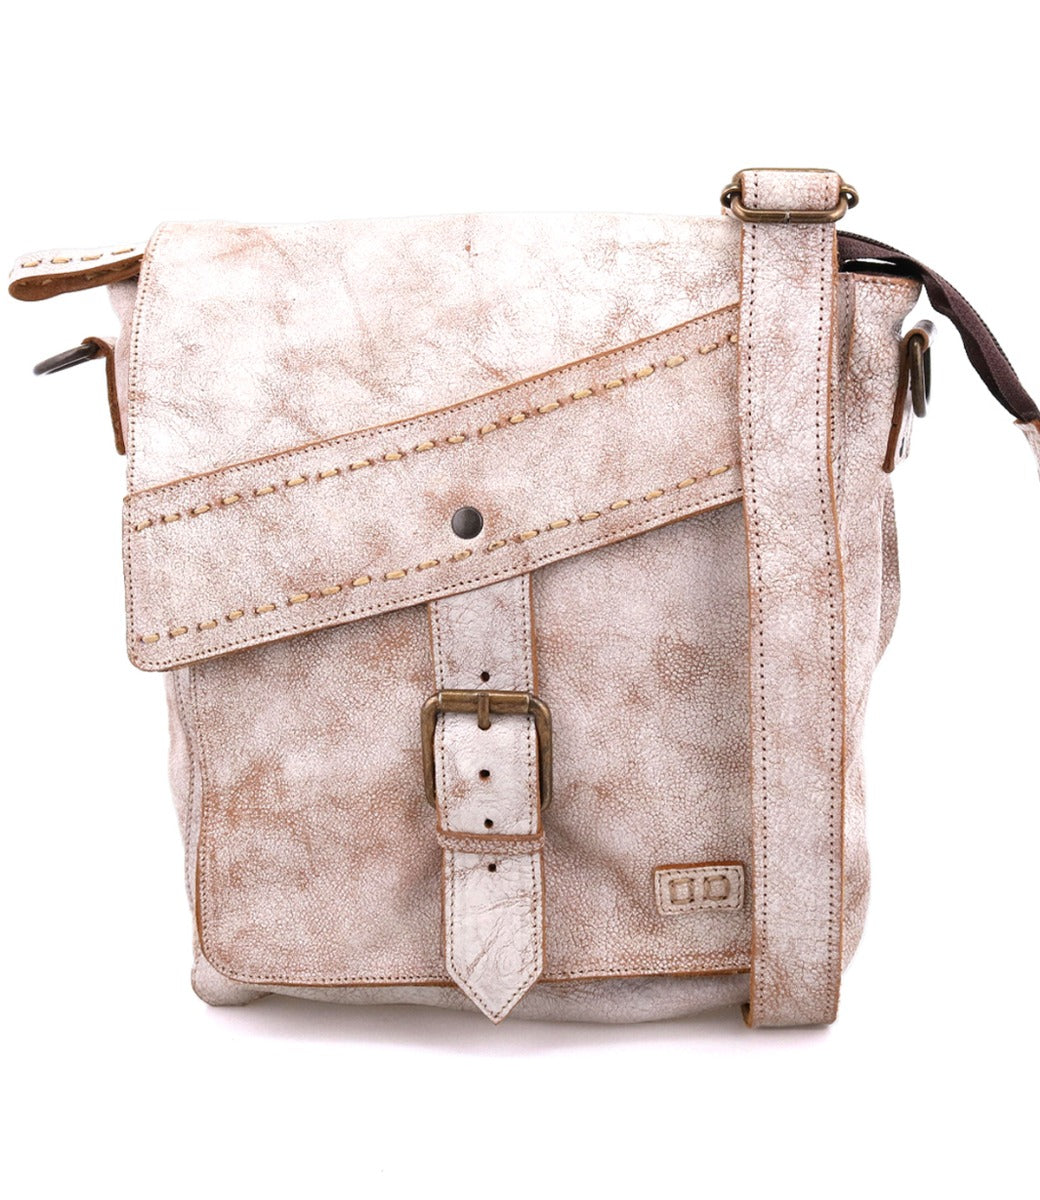 A Bed Stu Ainhoa LTC leather crossbody handbag with a front flap, buckle closure, and an adjustable strap, isolated on a white background.